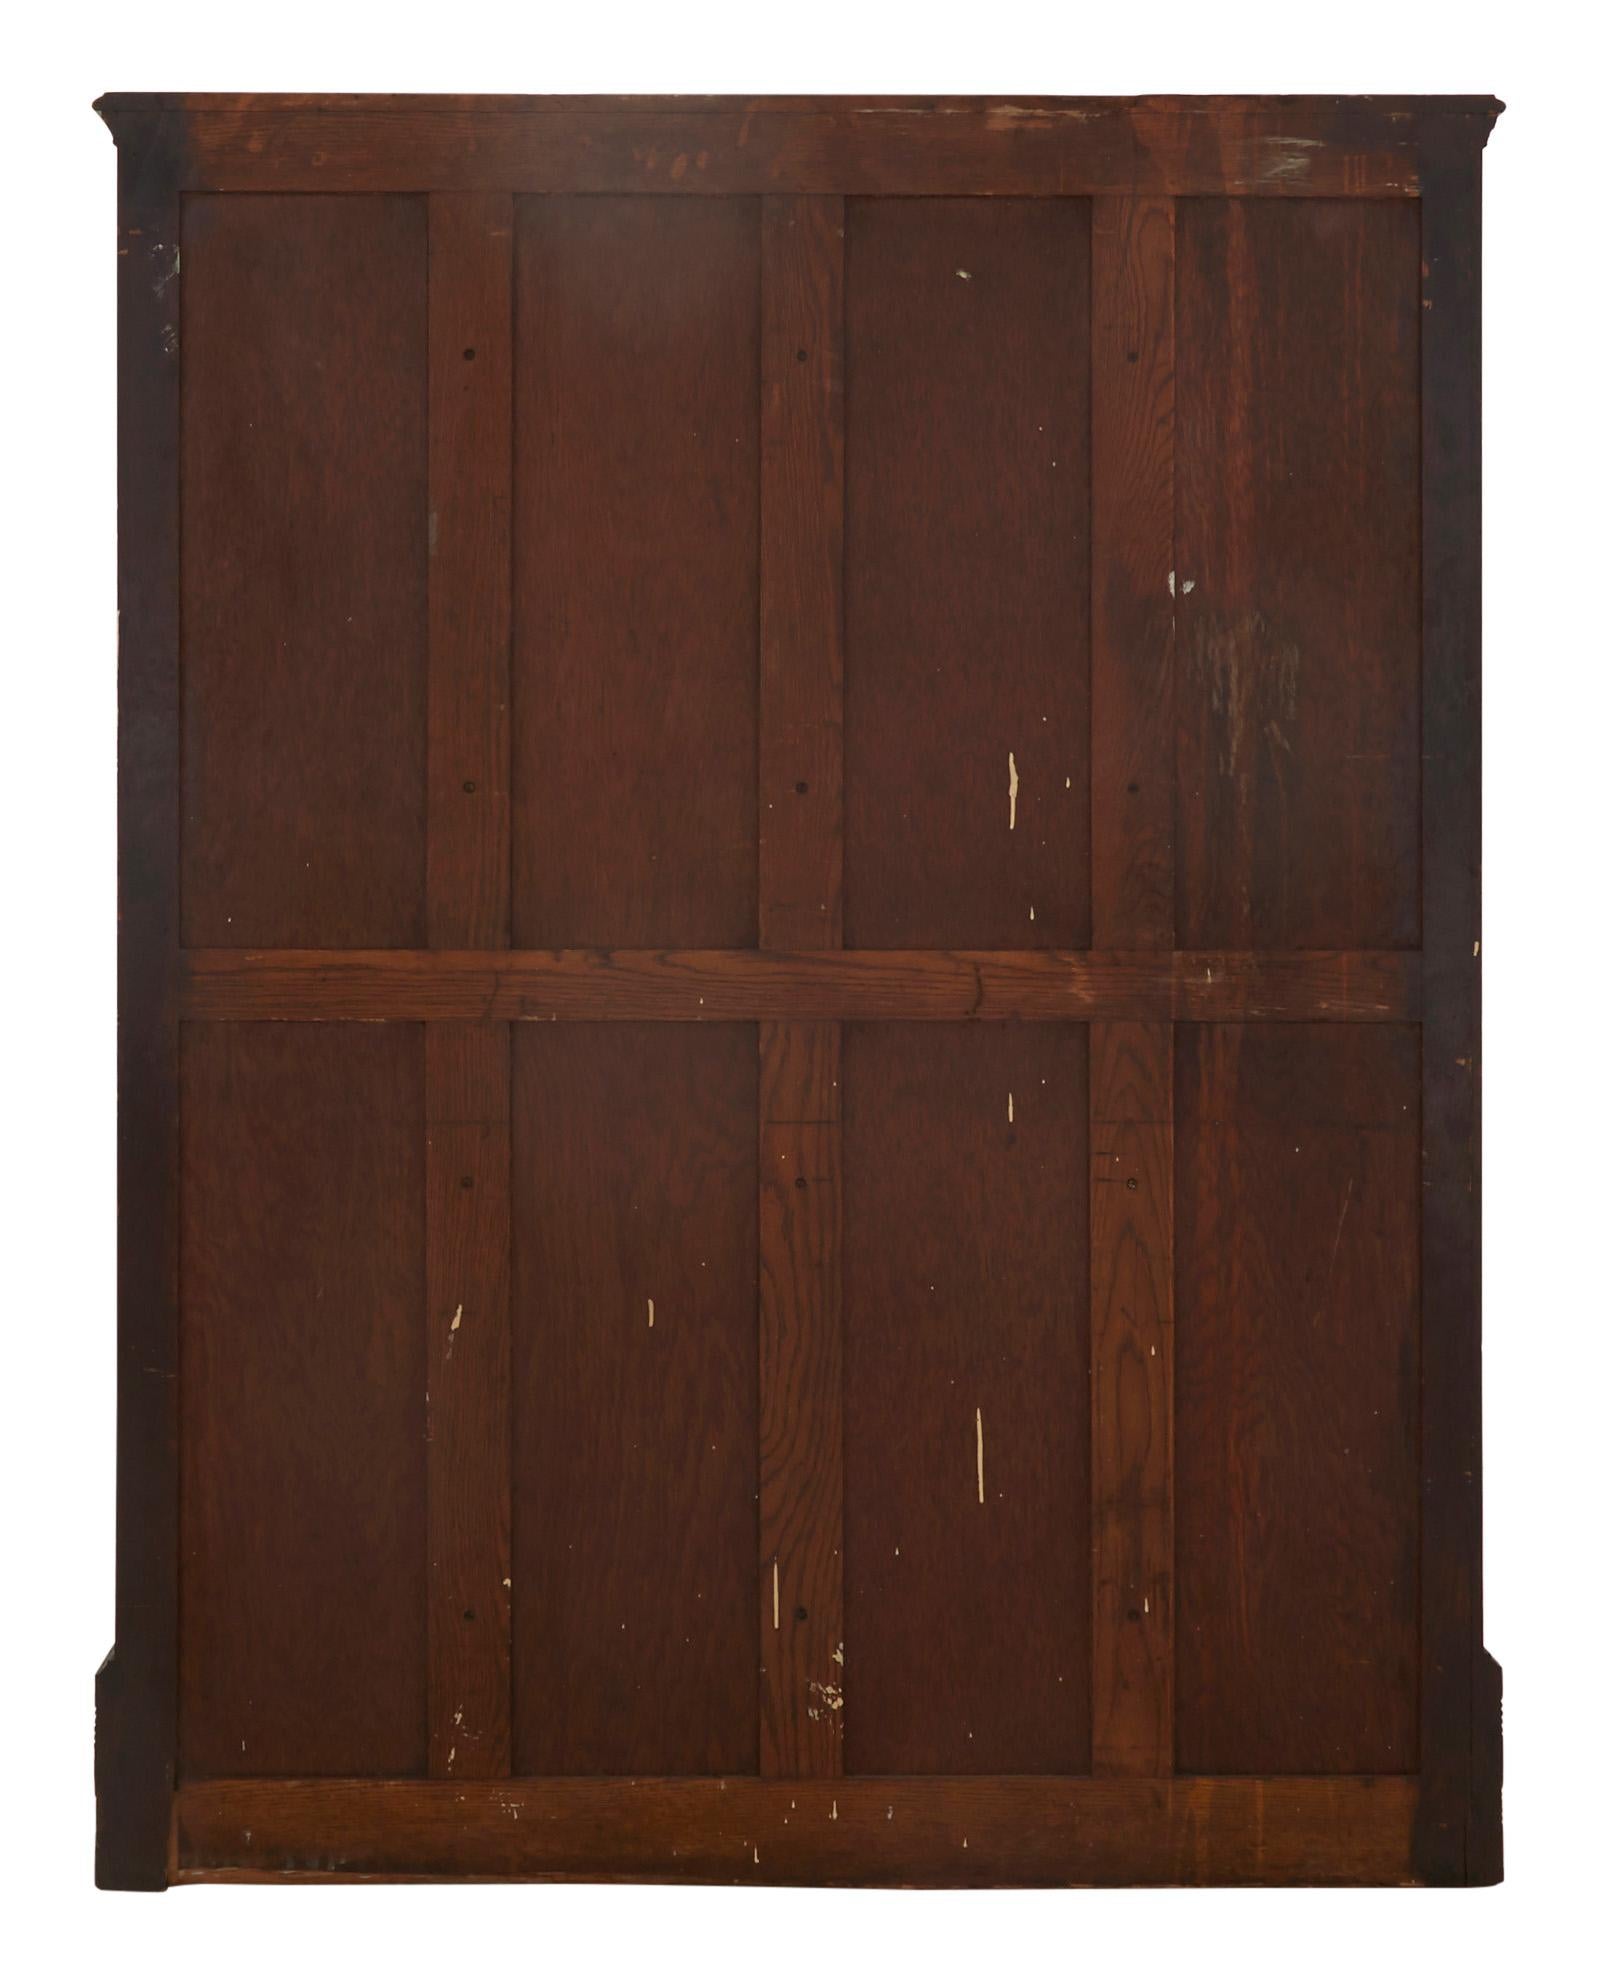 Wood Amberg Imperial Letter Filing Cabinet For Sale